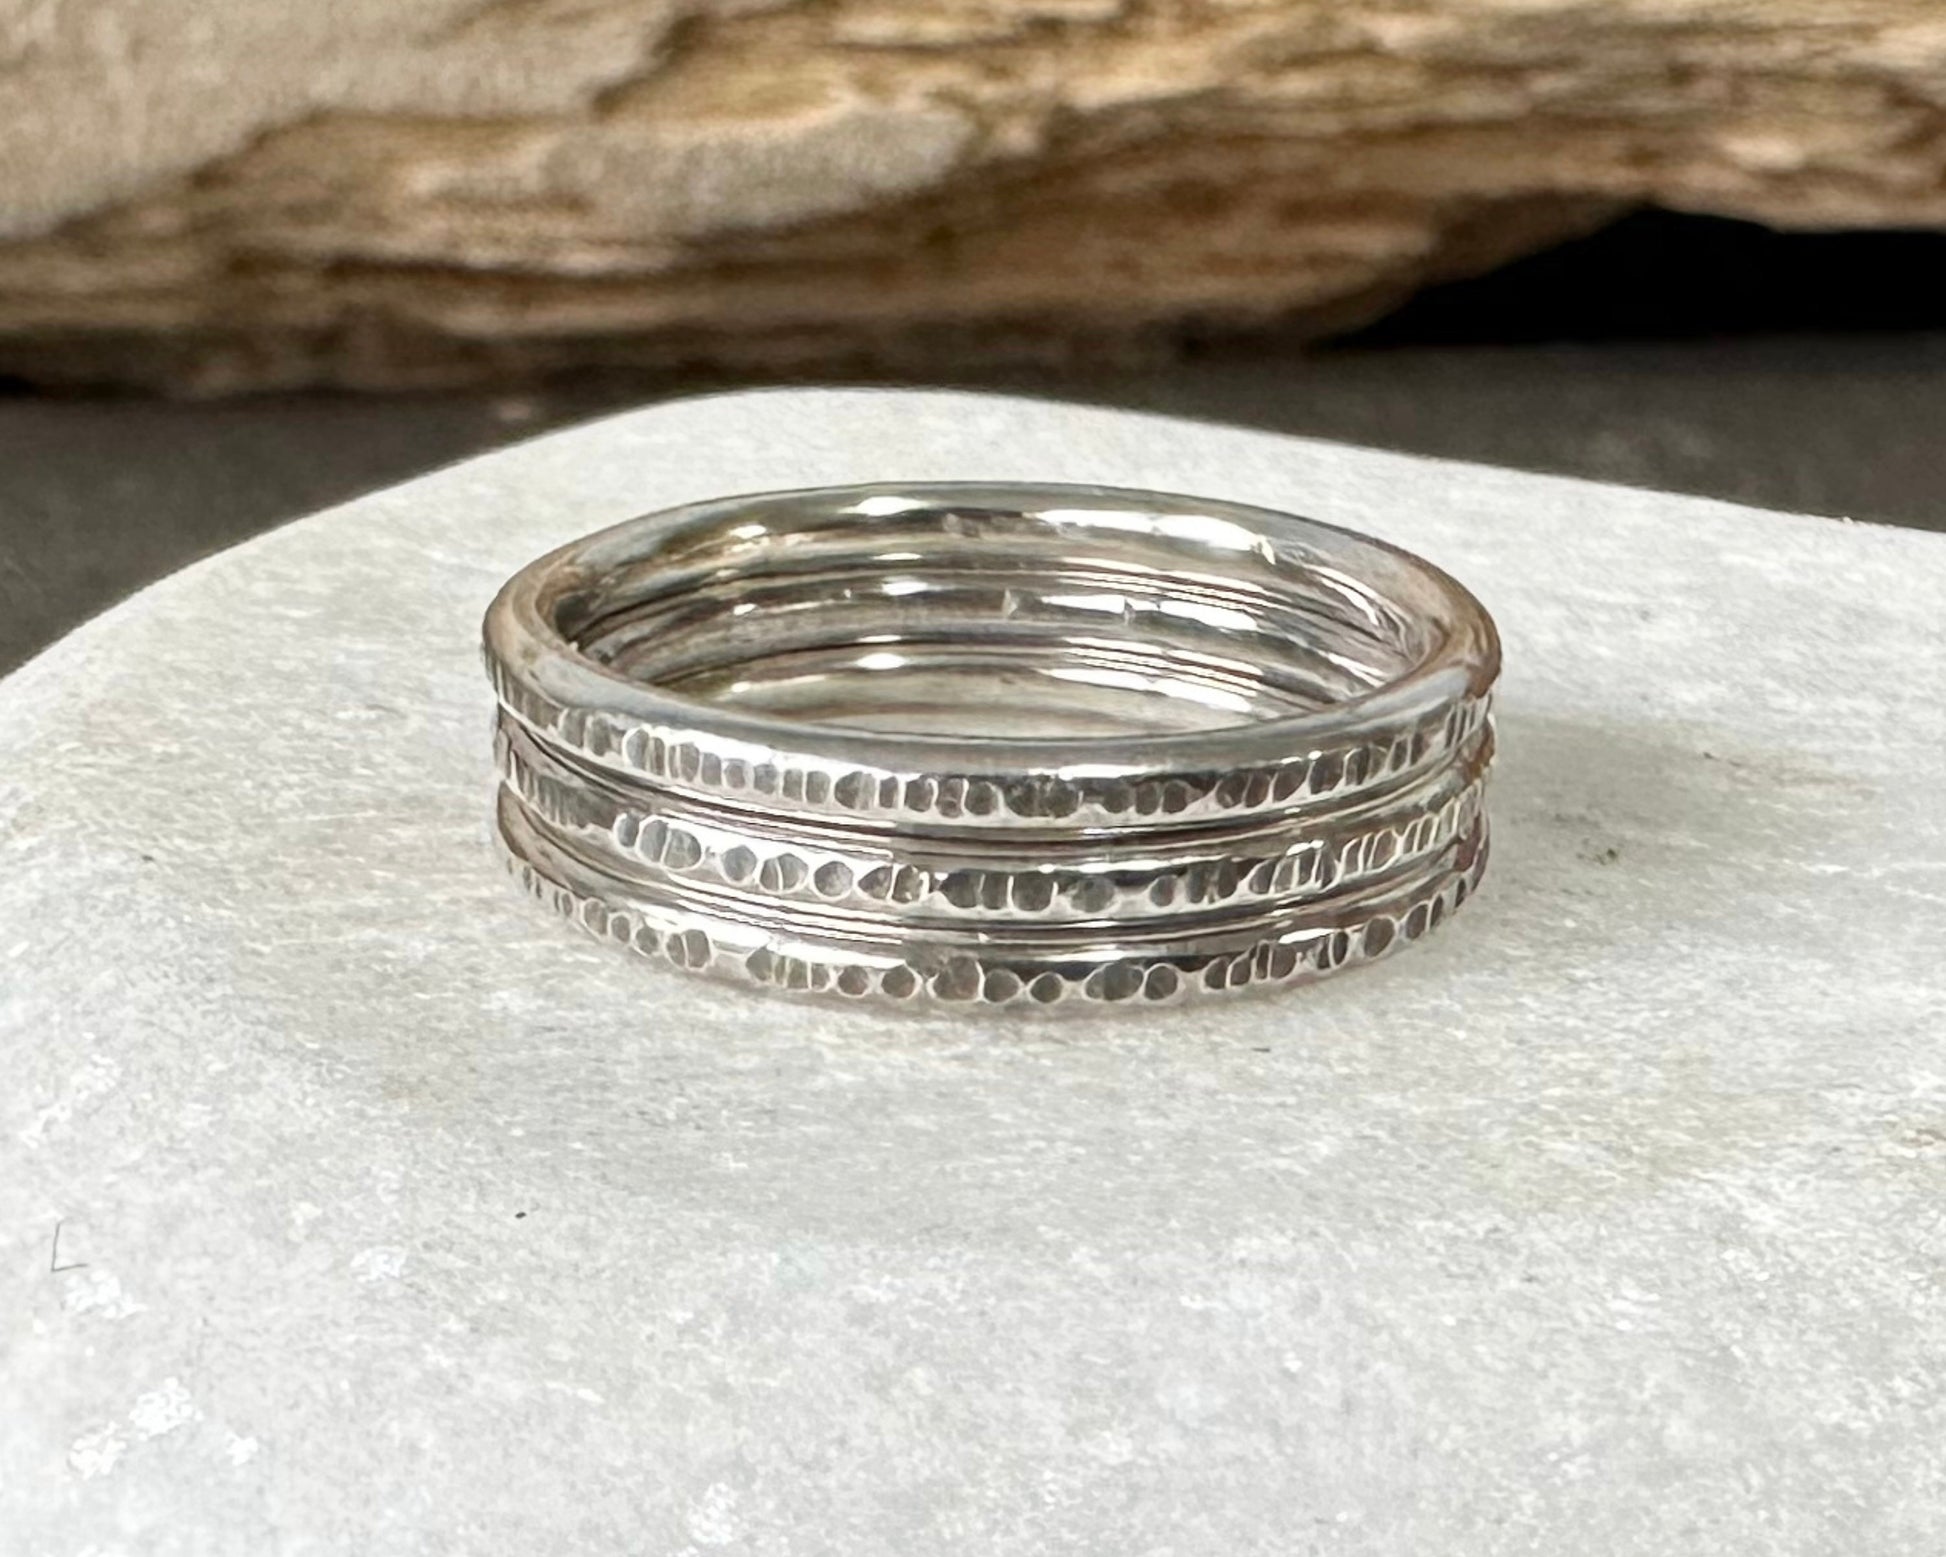 Set of three Oxodised 1.8mm 925 Sterling Silver Stacking Rings, Ripple Hammered Effect Minimalist Ring Band, Handmade Rustic Stacking Ring